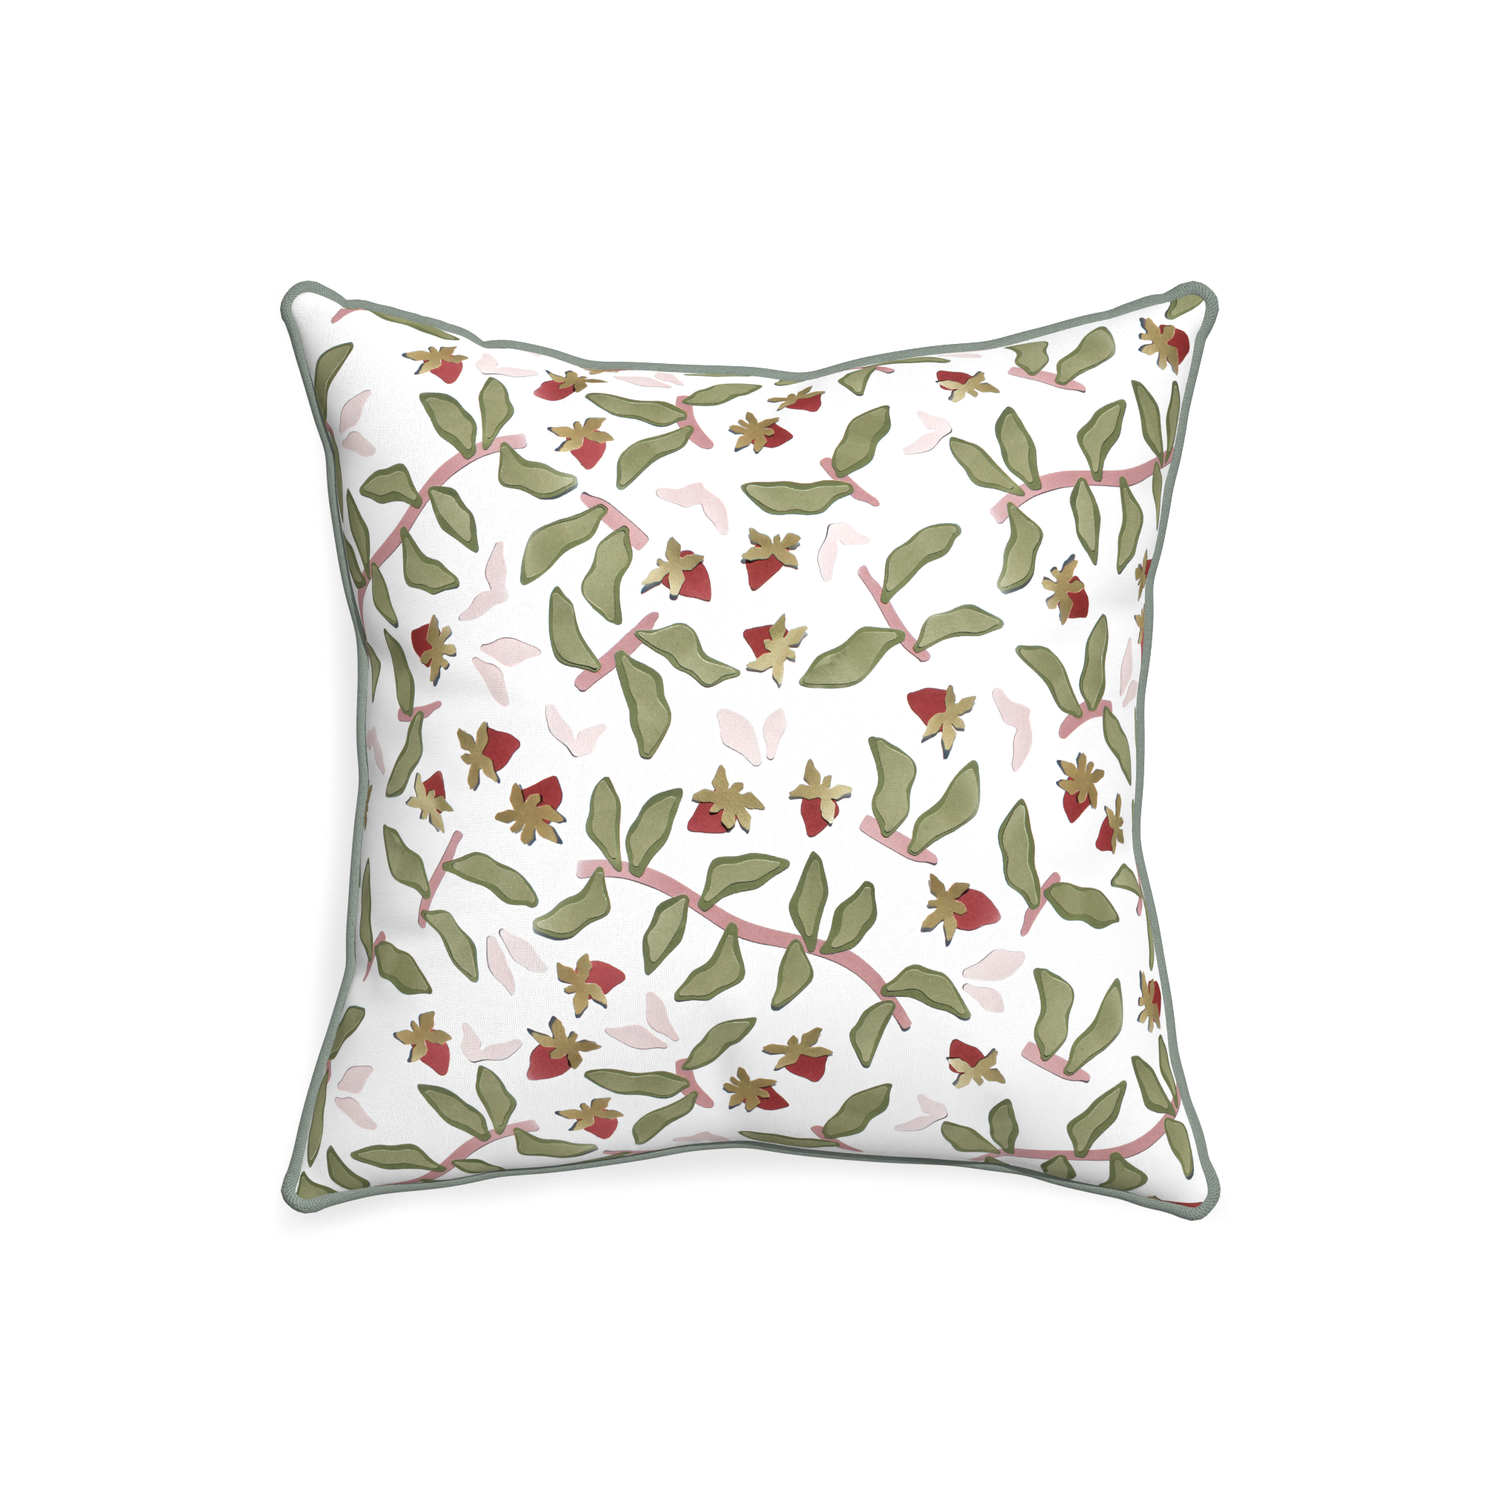 20-square nellie custom strawberry & botanicalpillow with sage piping on white background